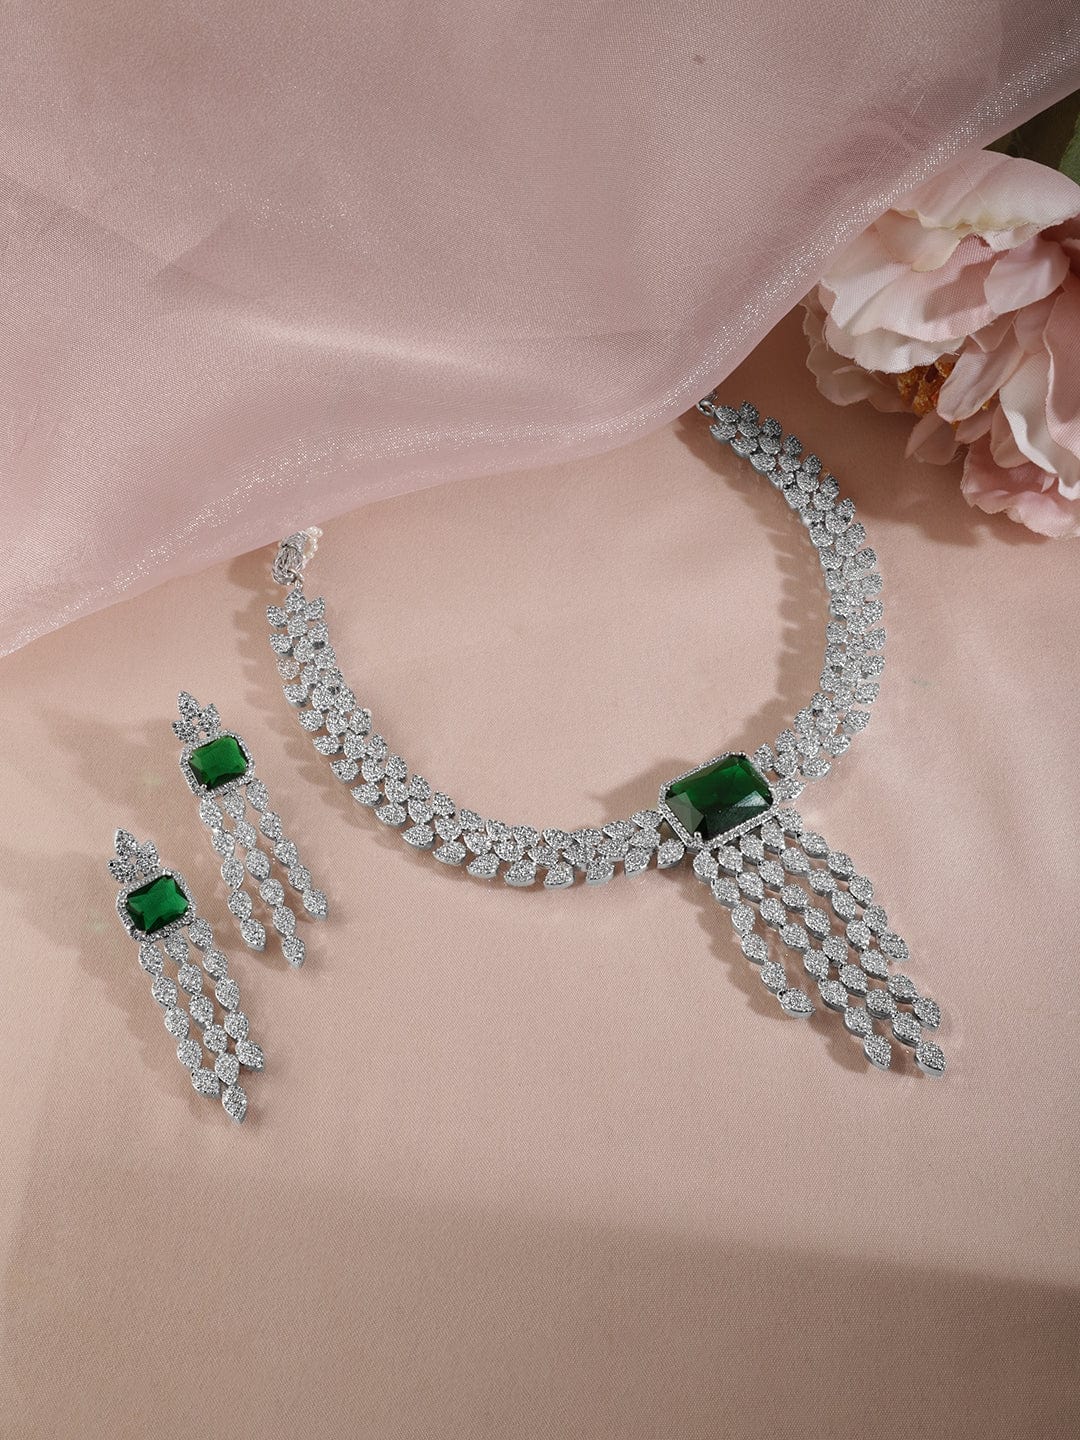 Rhodium Plated Luxury AAA Cubic Zirconia And Emerald Studed  Necklace Set Necklaces, Necklace Sets, Chains & Mangalsutra